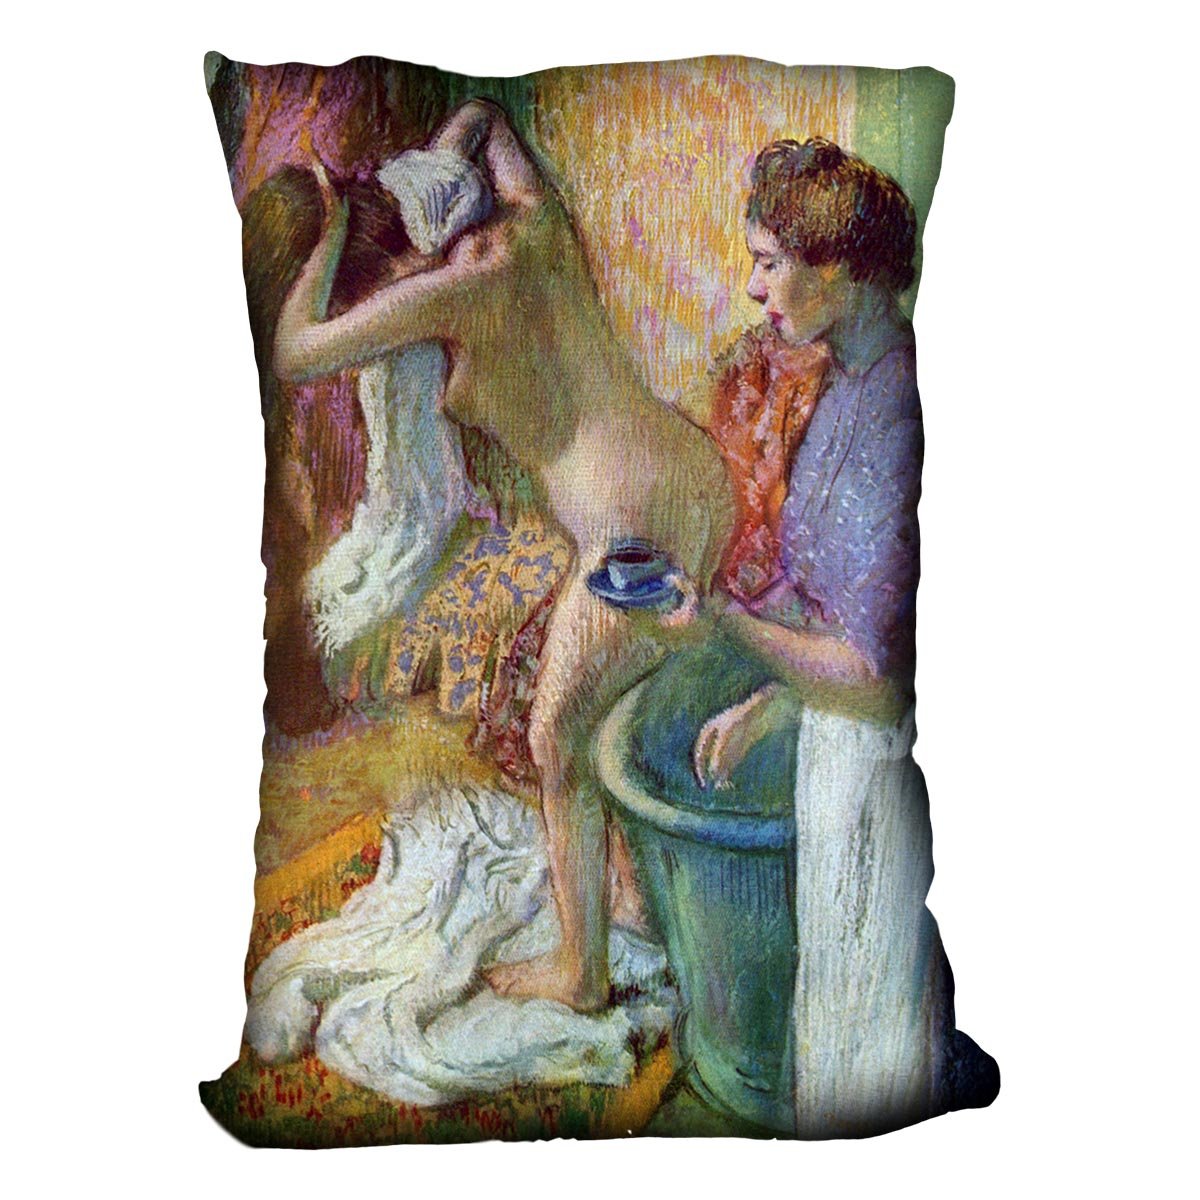 After bathing 1 by Degas Cushion